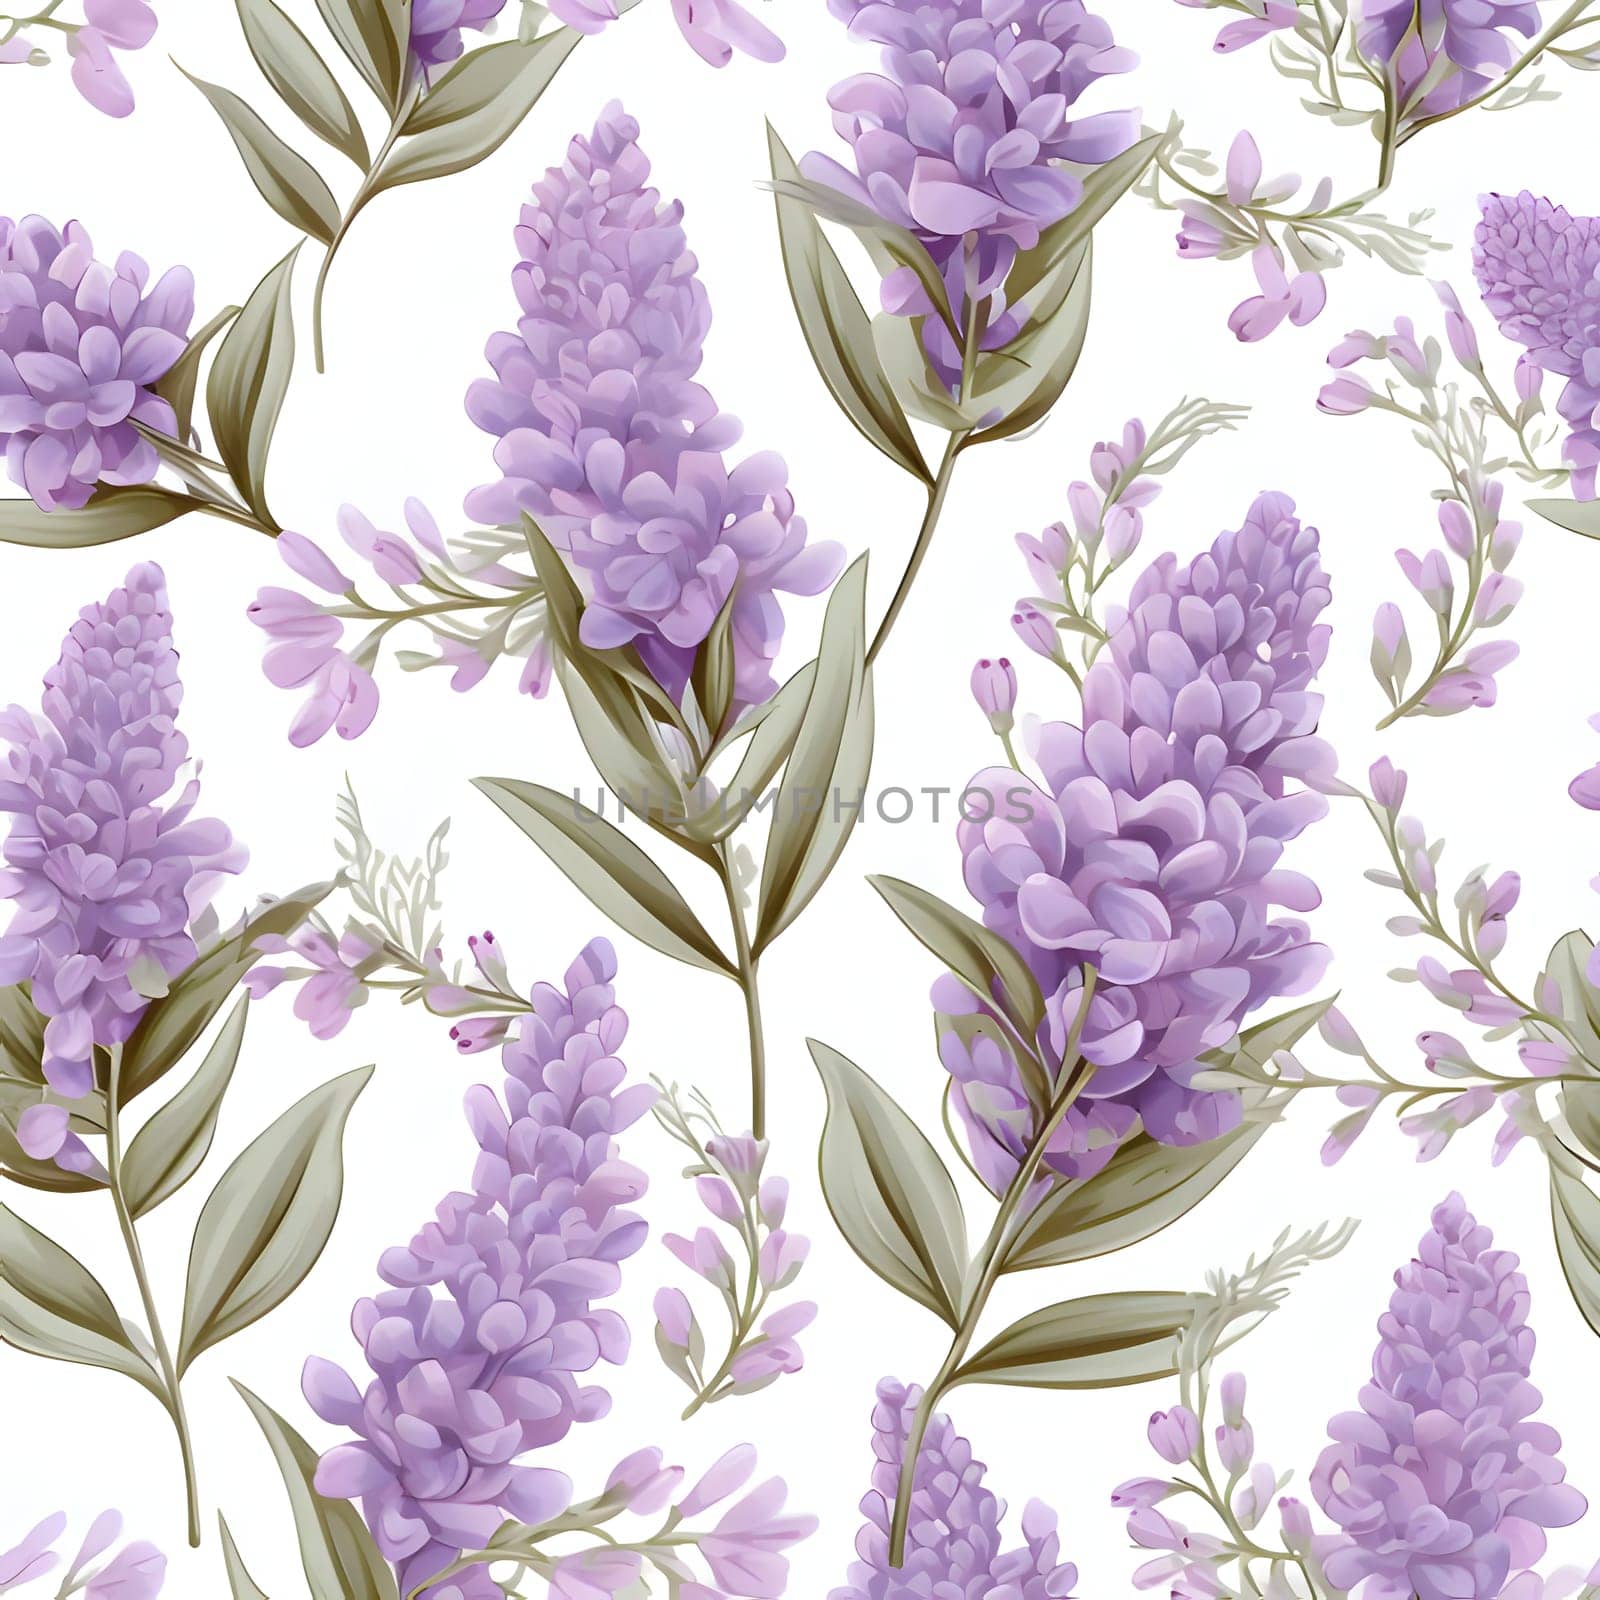 Patterns and banners backgrounds: Seamless pattern with lilac flowers on a white background.